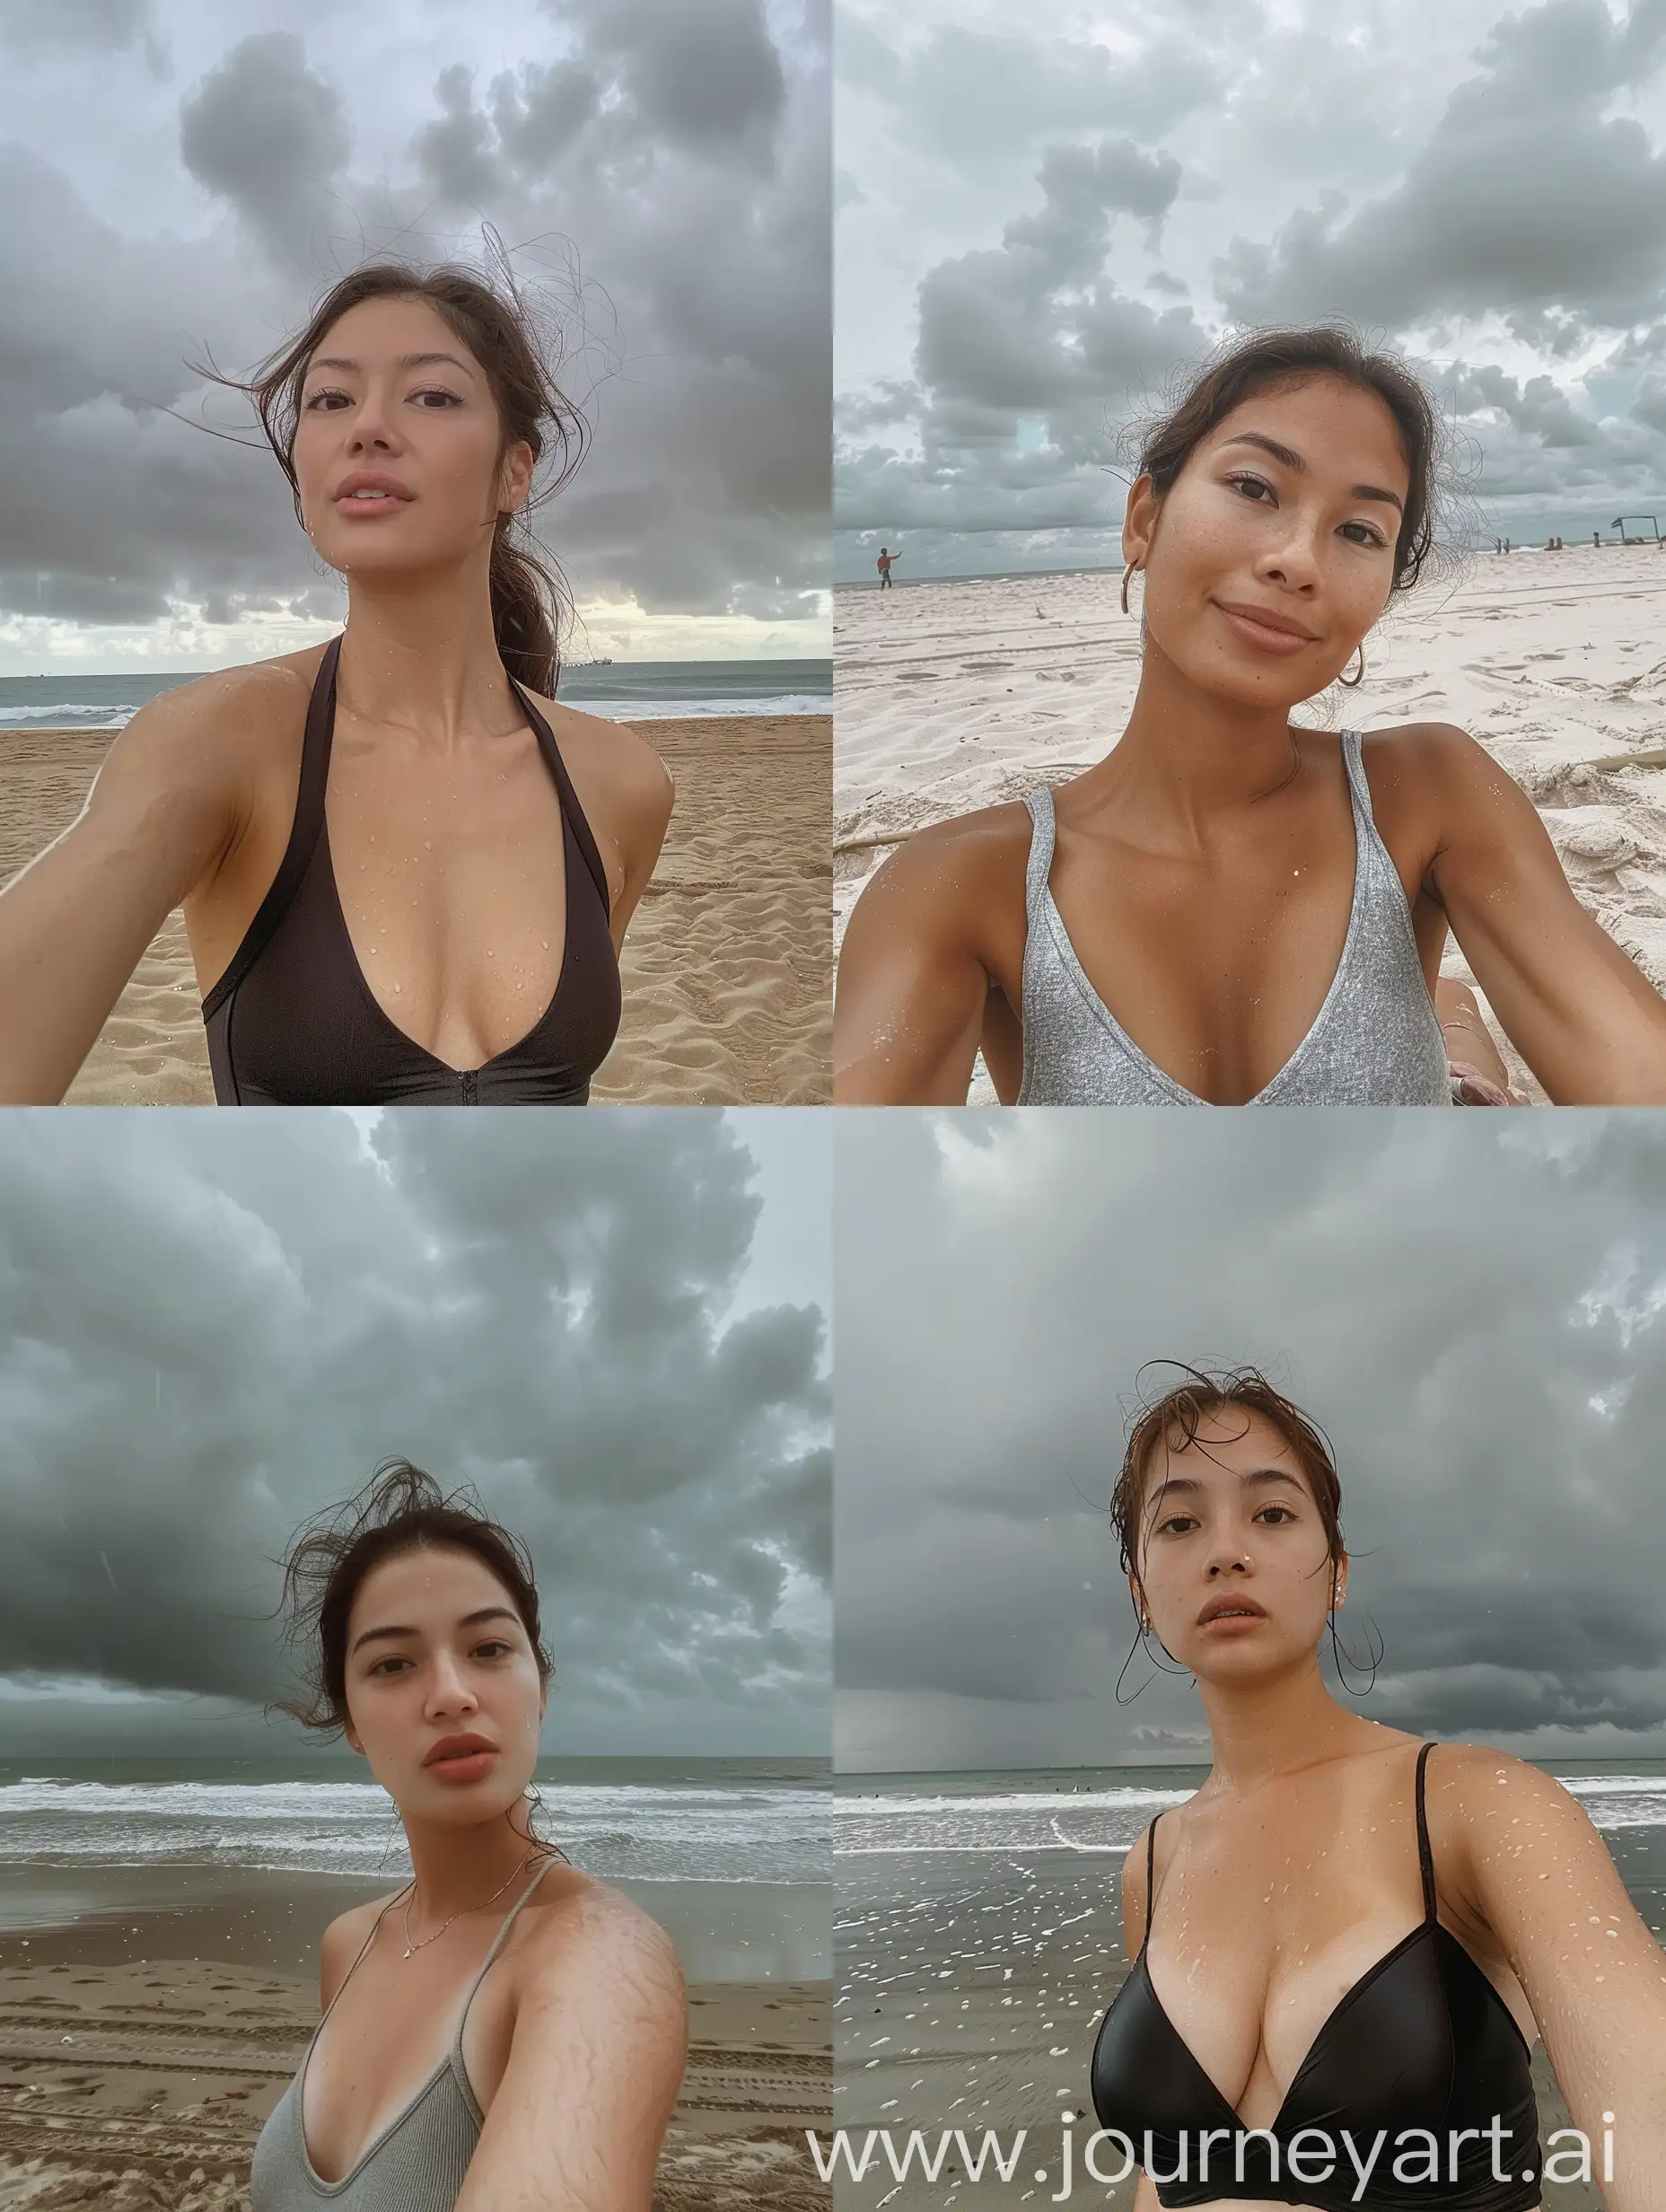 instagram selfie of a spanish-filipino woman in her 20s, with fair skin, at the beach under an overcast sky